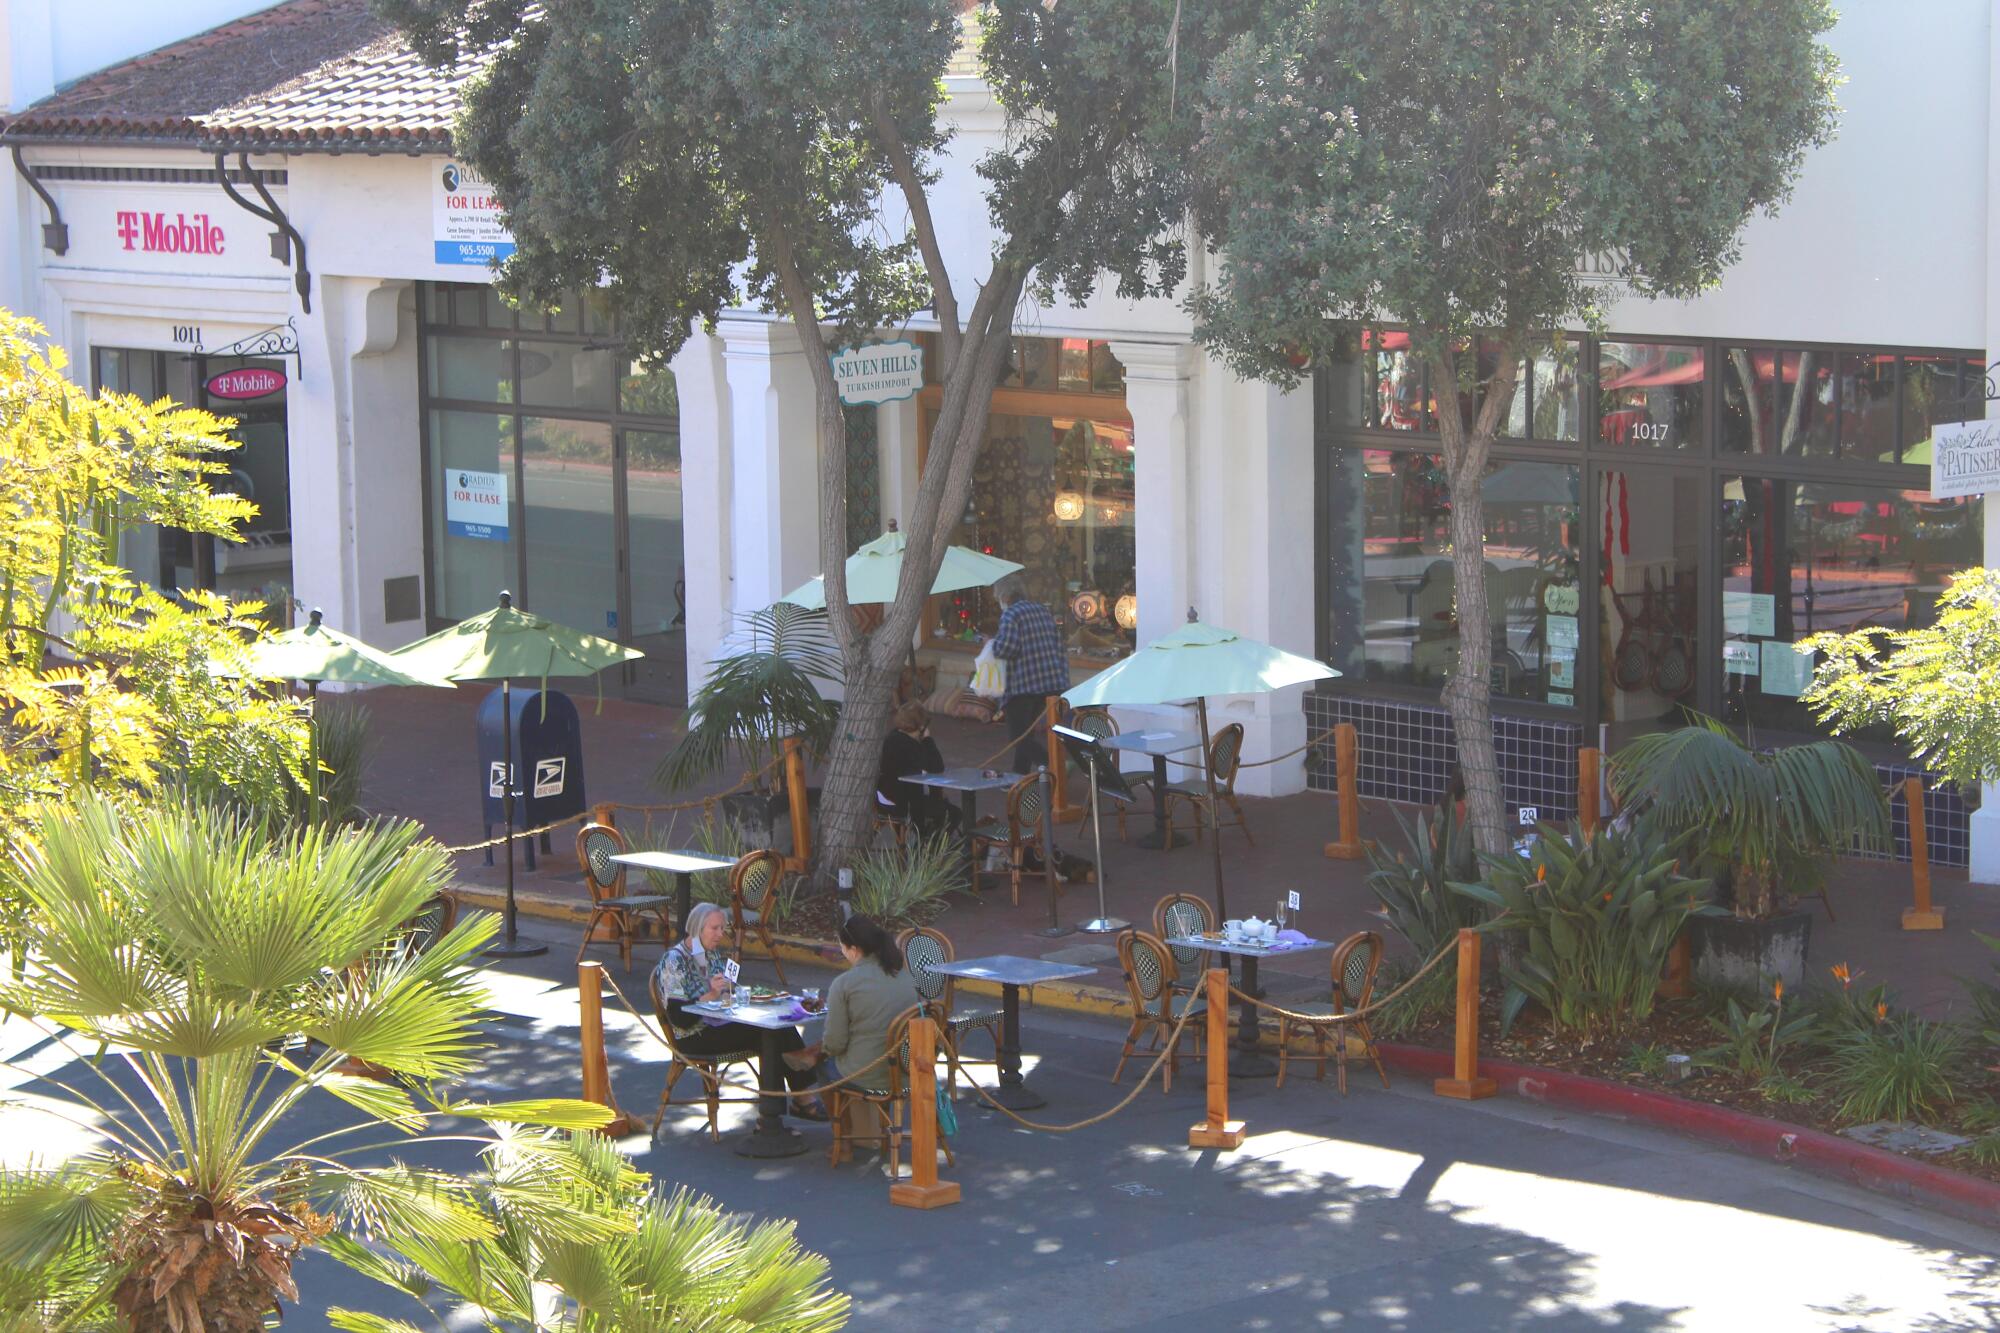 A street view in Santa Barbara, which moved cars off the main drag downtown and used the road for outdoor dining.